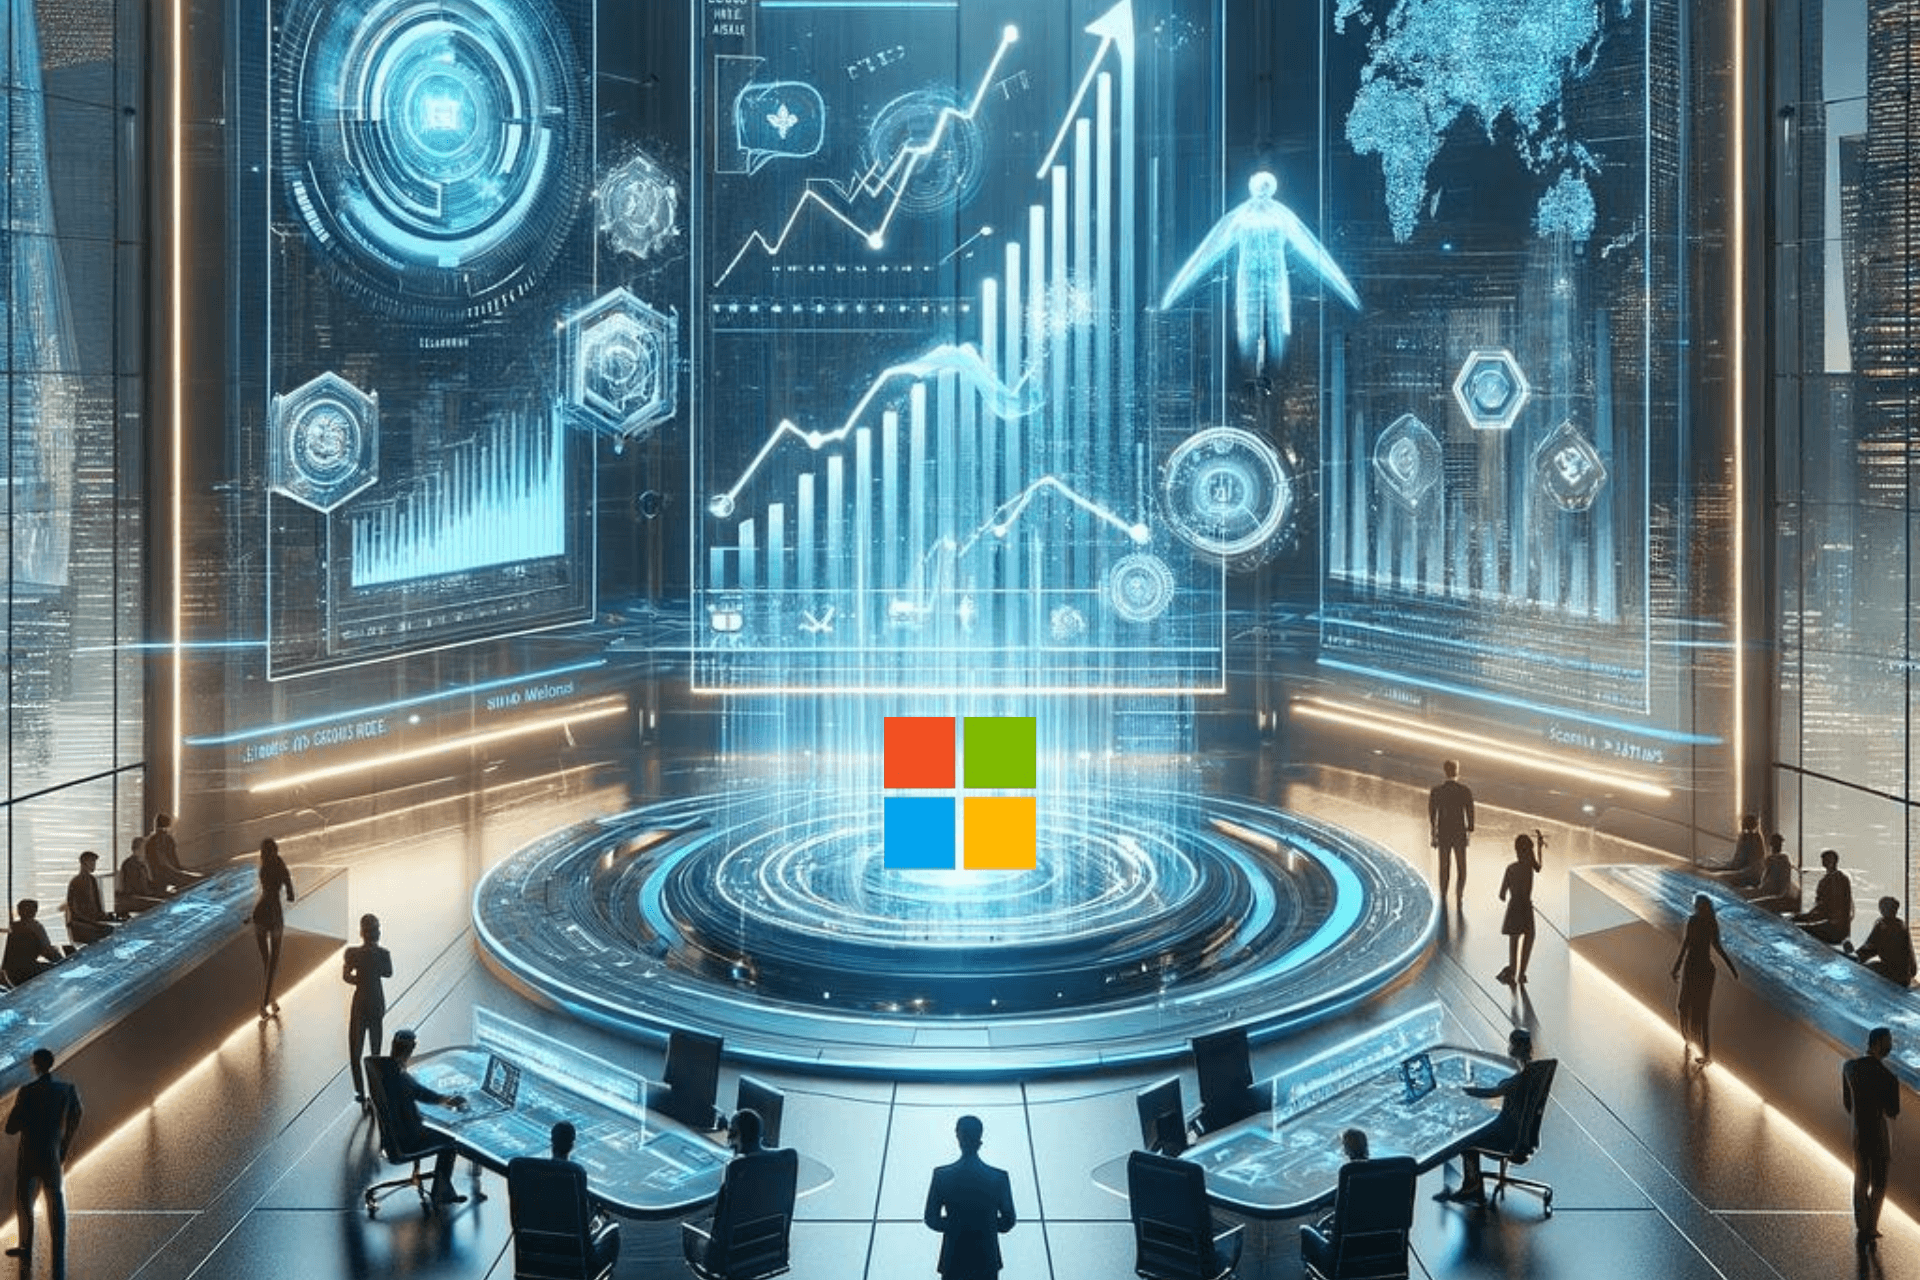 Previewing Microsoft’s Q3 earnings: OpenAI boosts its technology aspirations